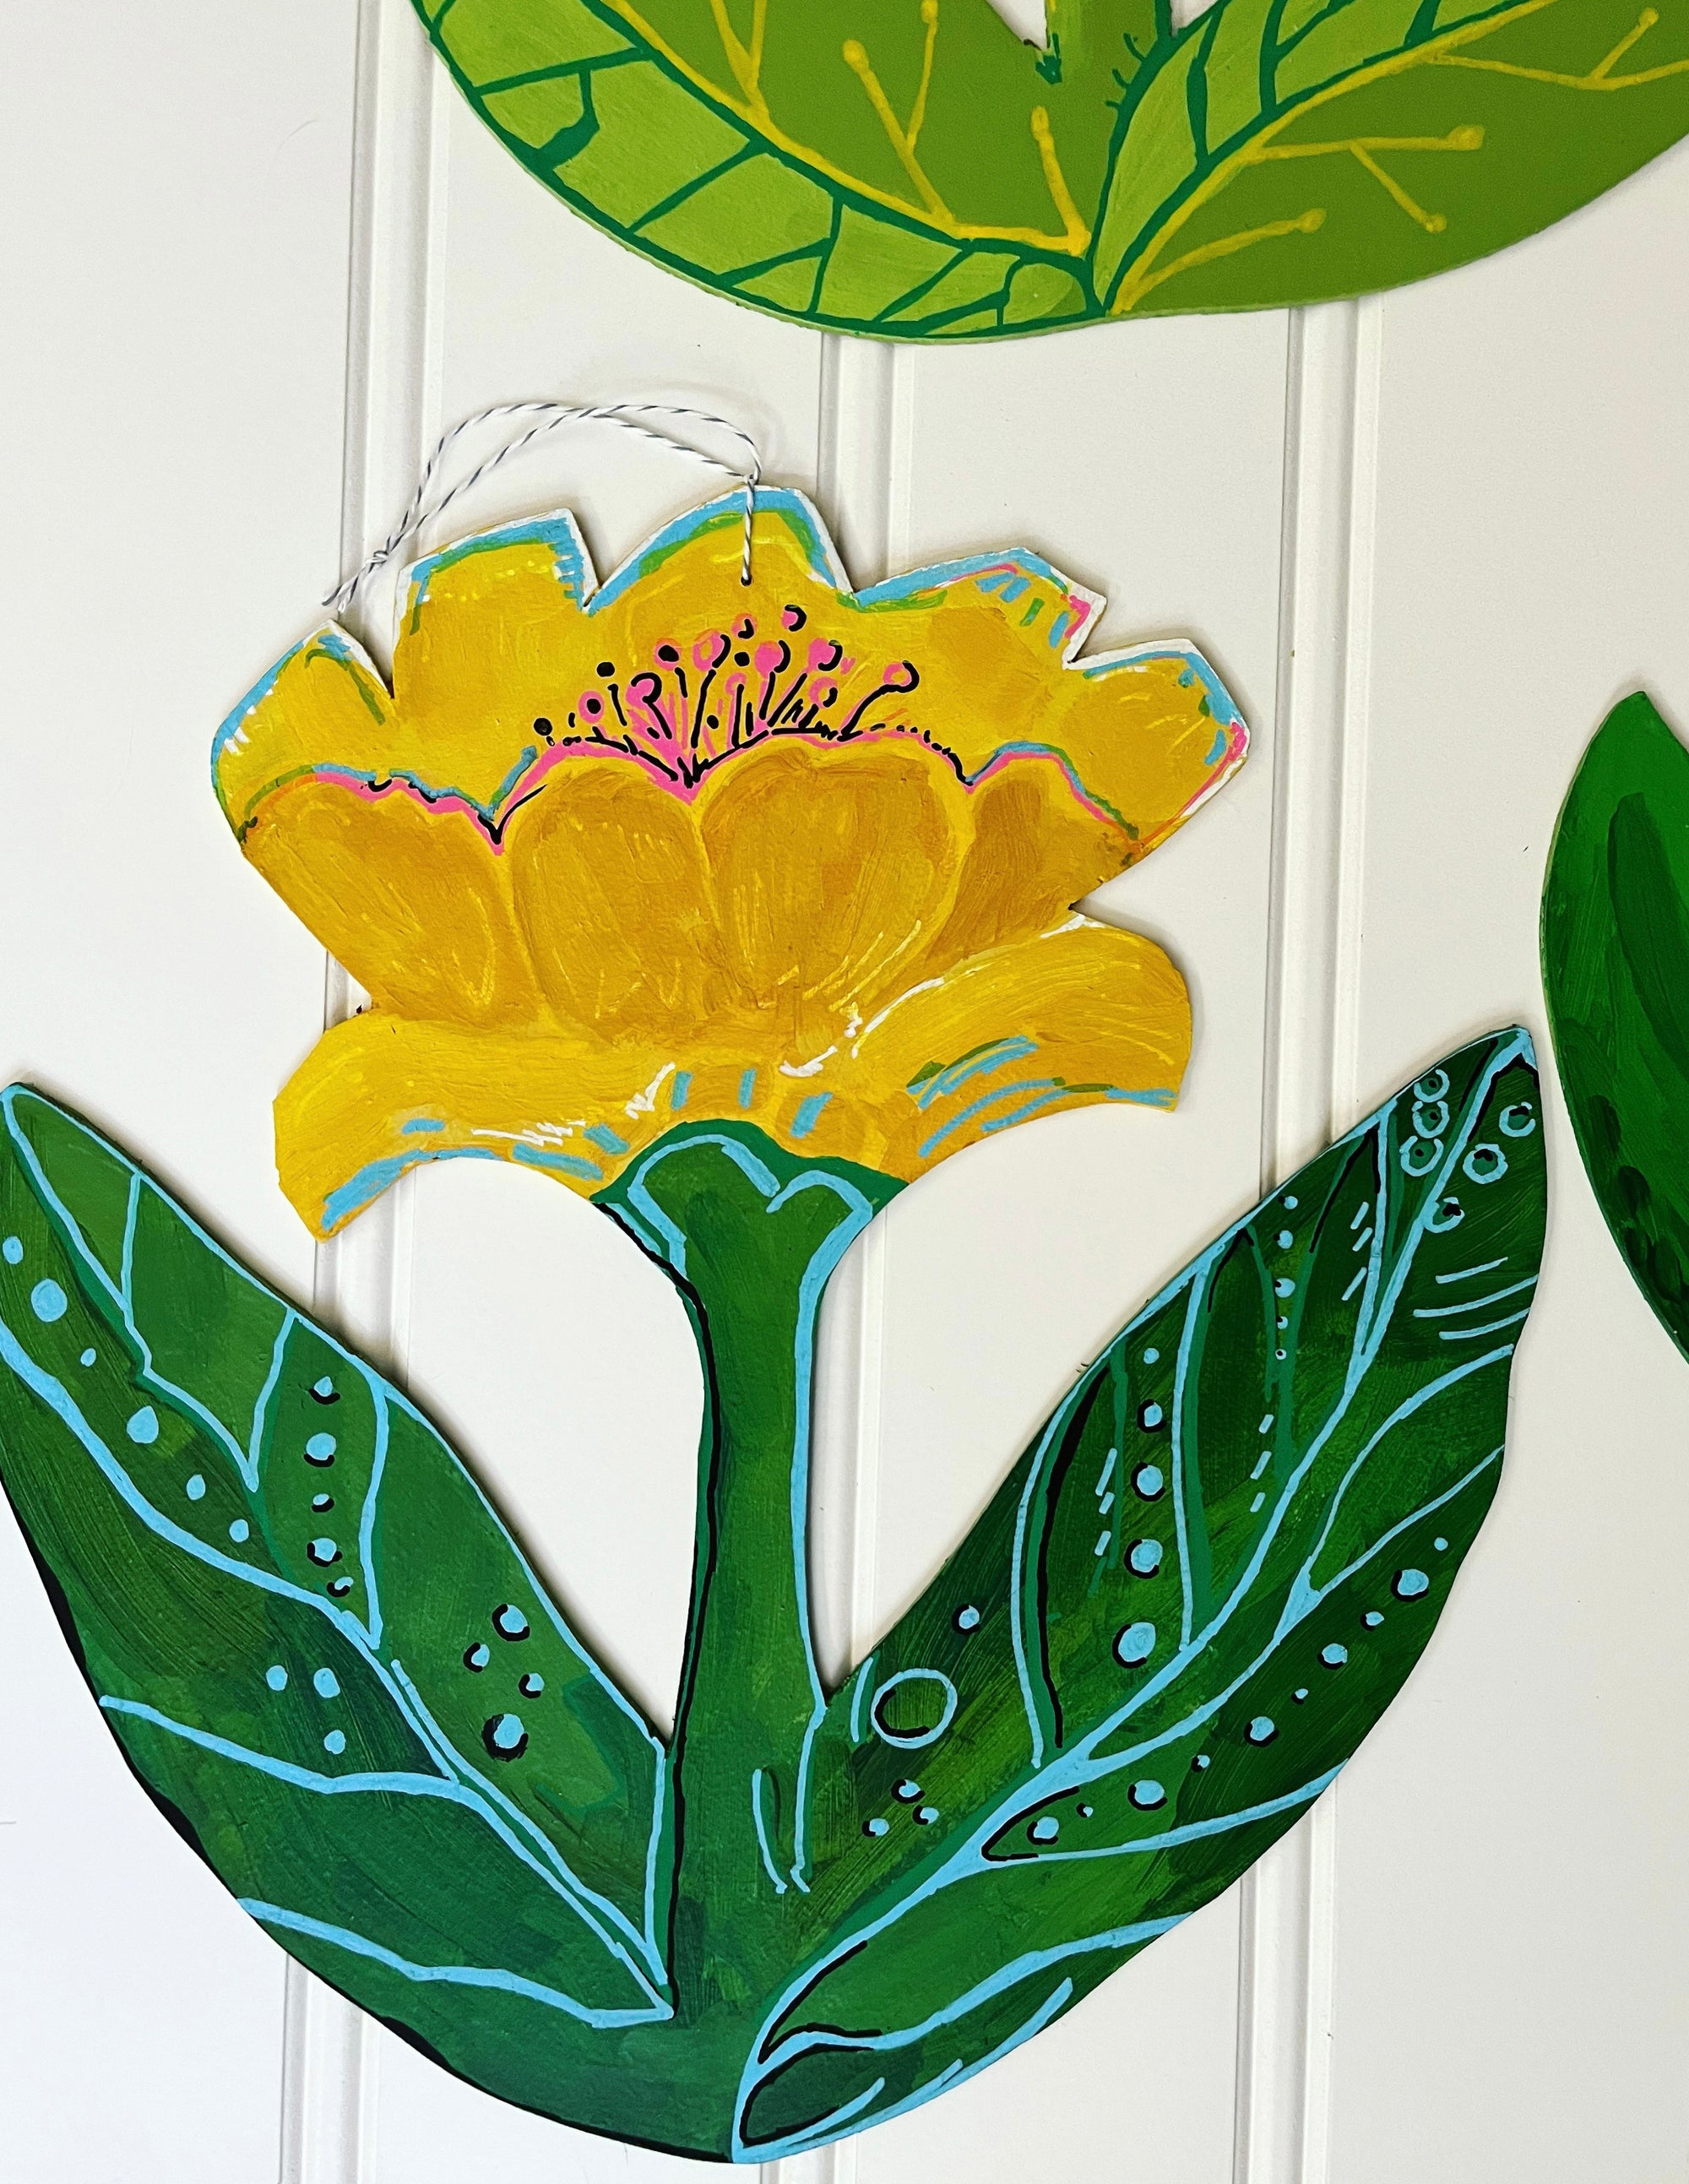 cutout wooden flower painting, by artist Abigail Gray Swartz. Yellow peony flower, acrylic on panel.